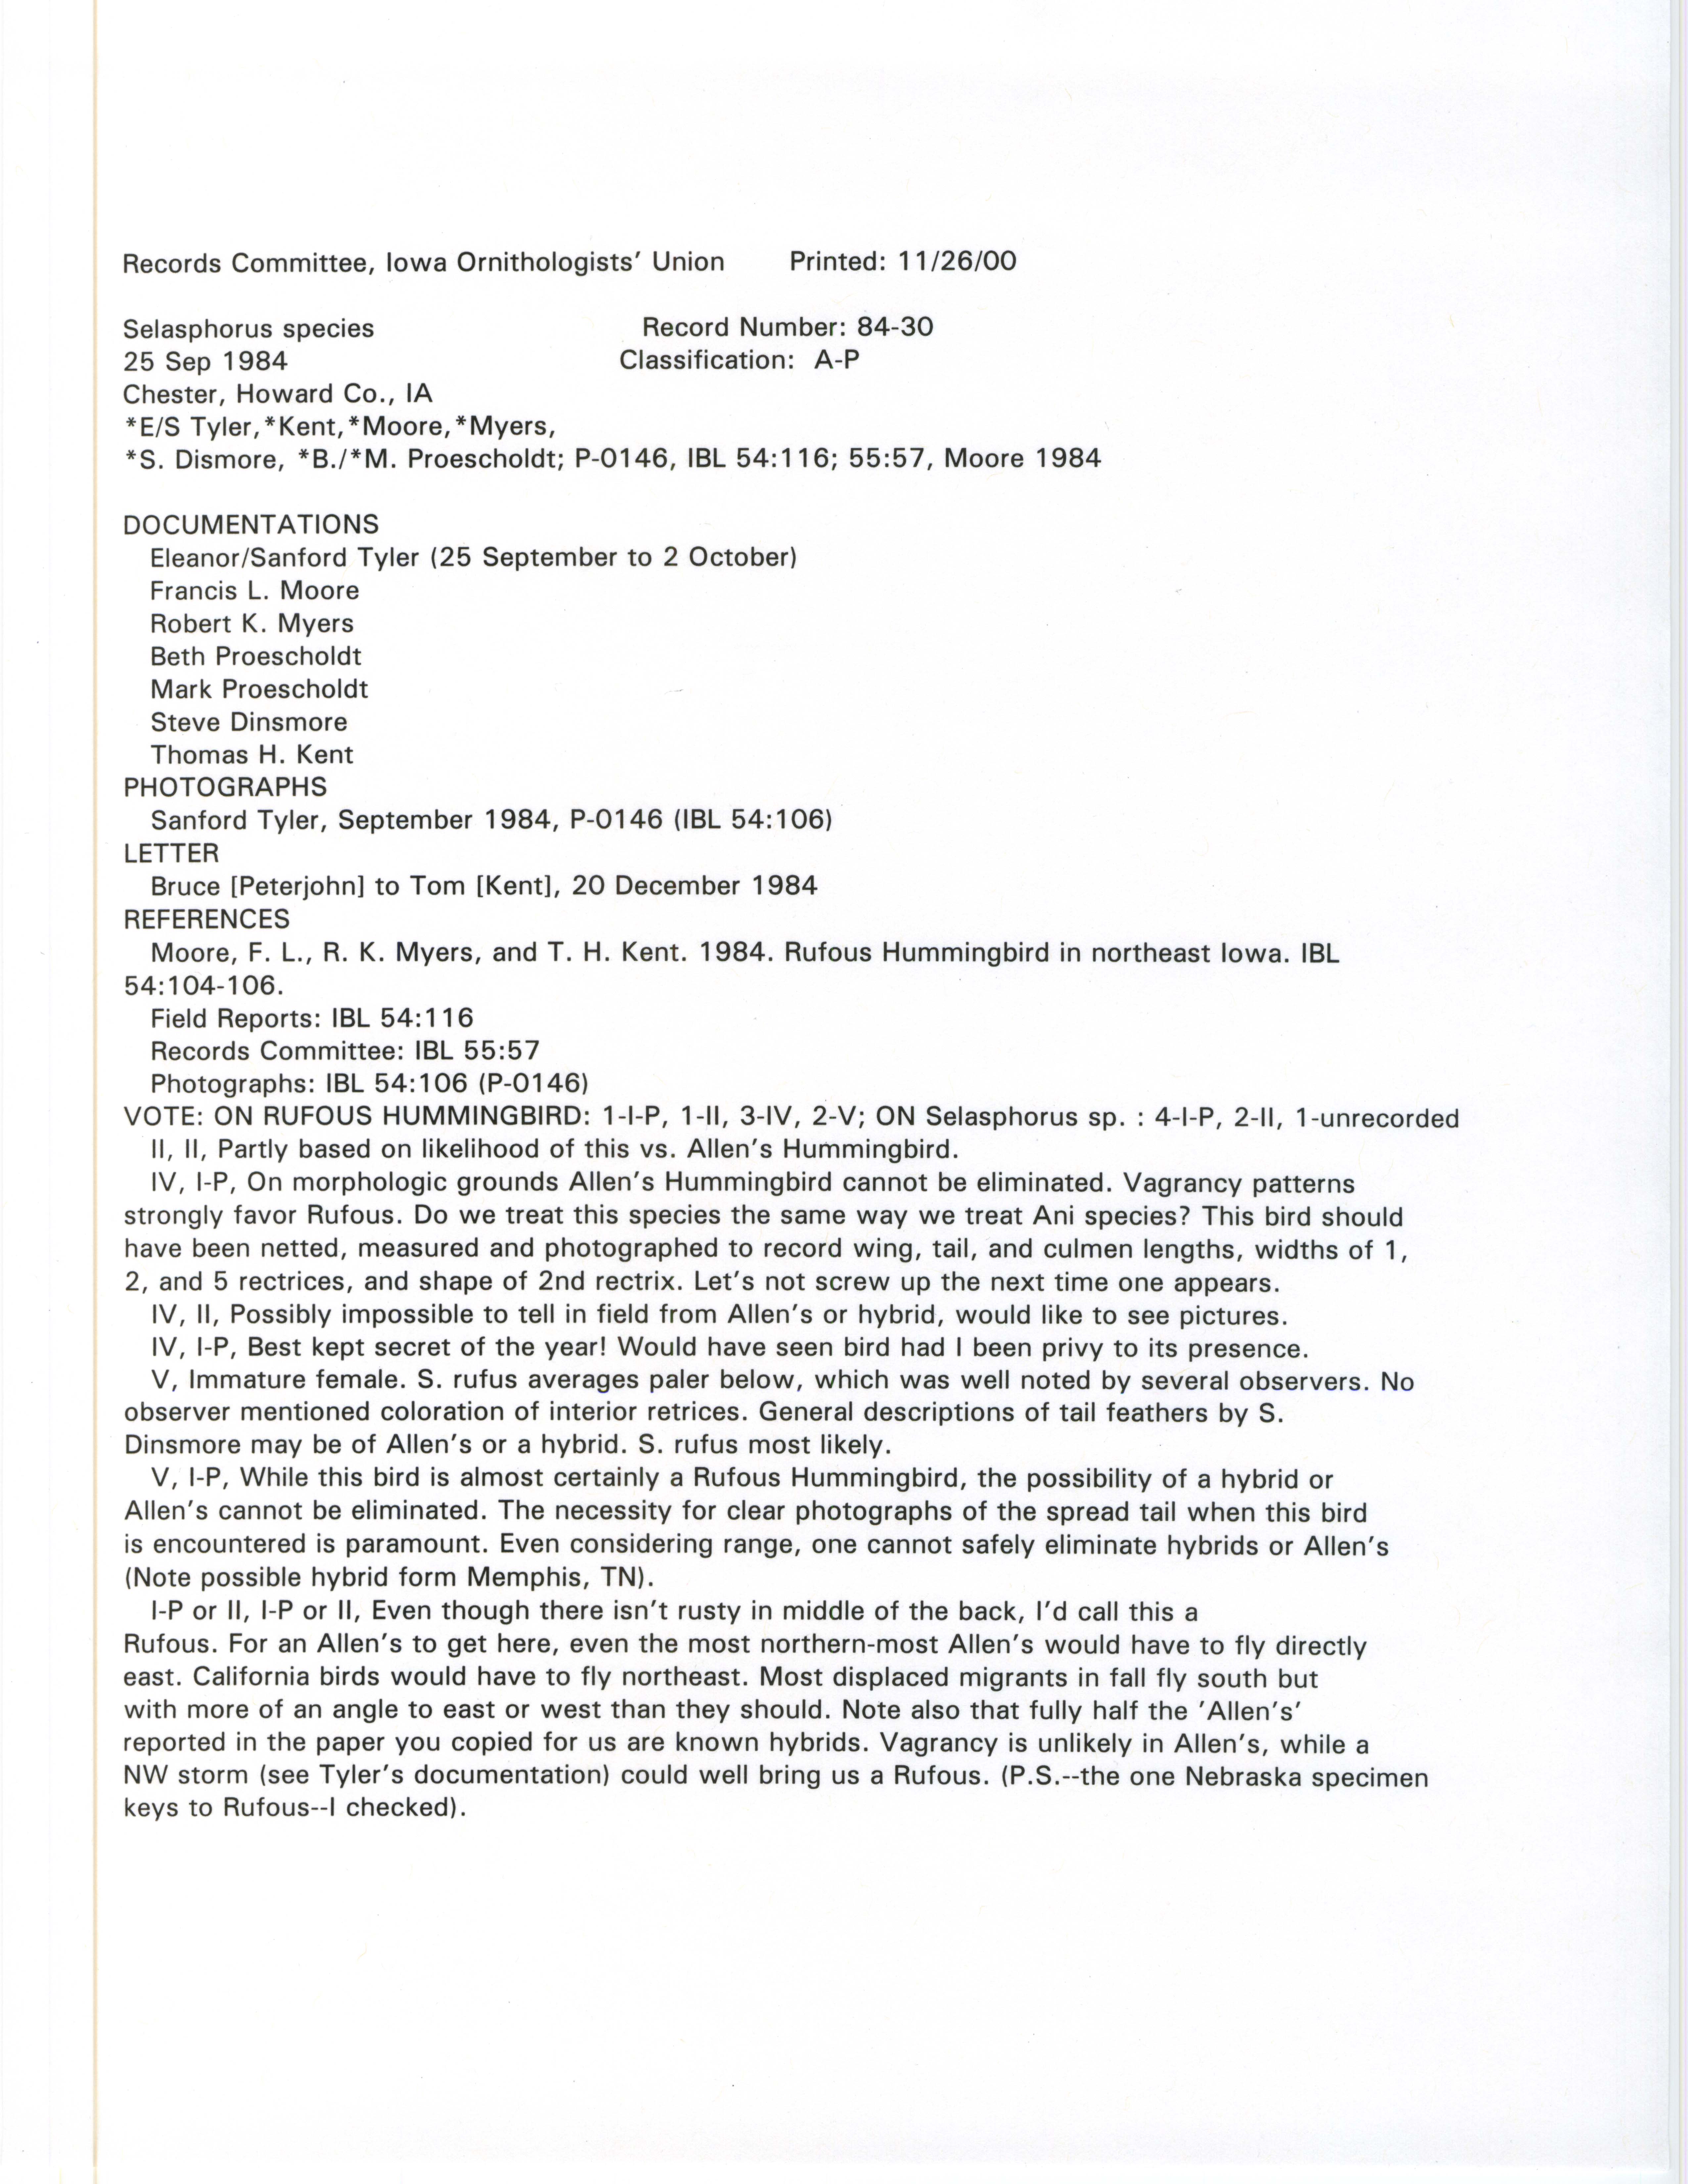 Records Committee review for rare bird sighting for Selasphorus species at Chester, 1984